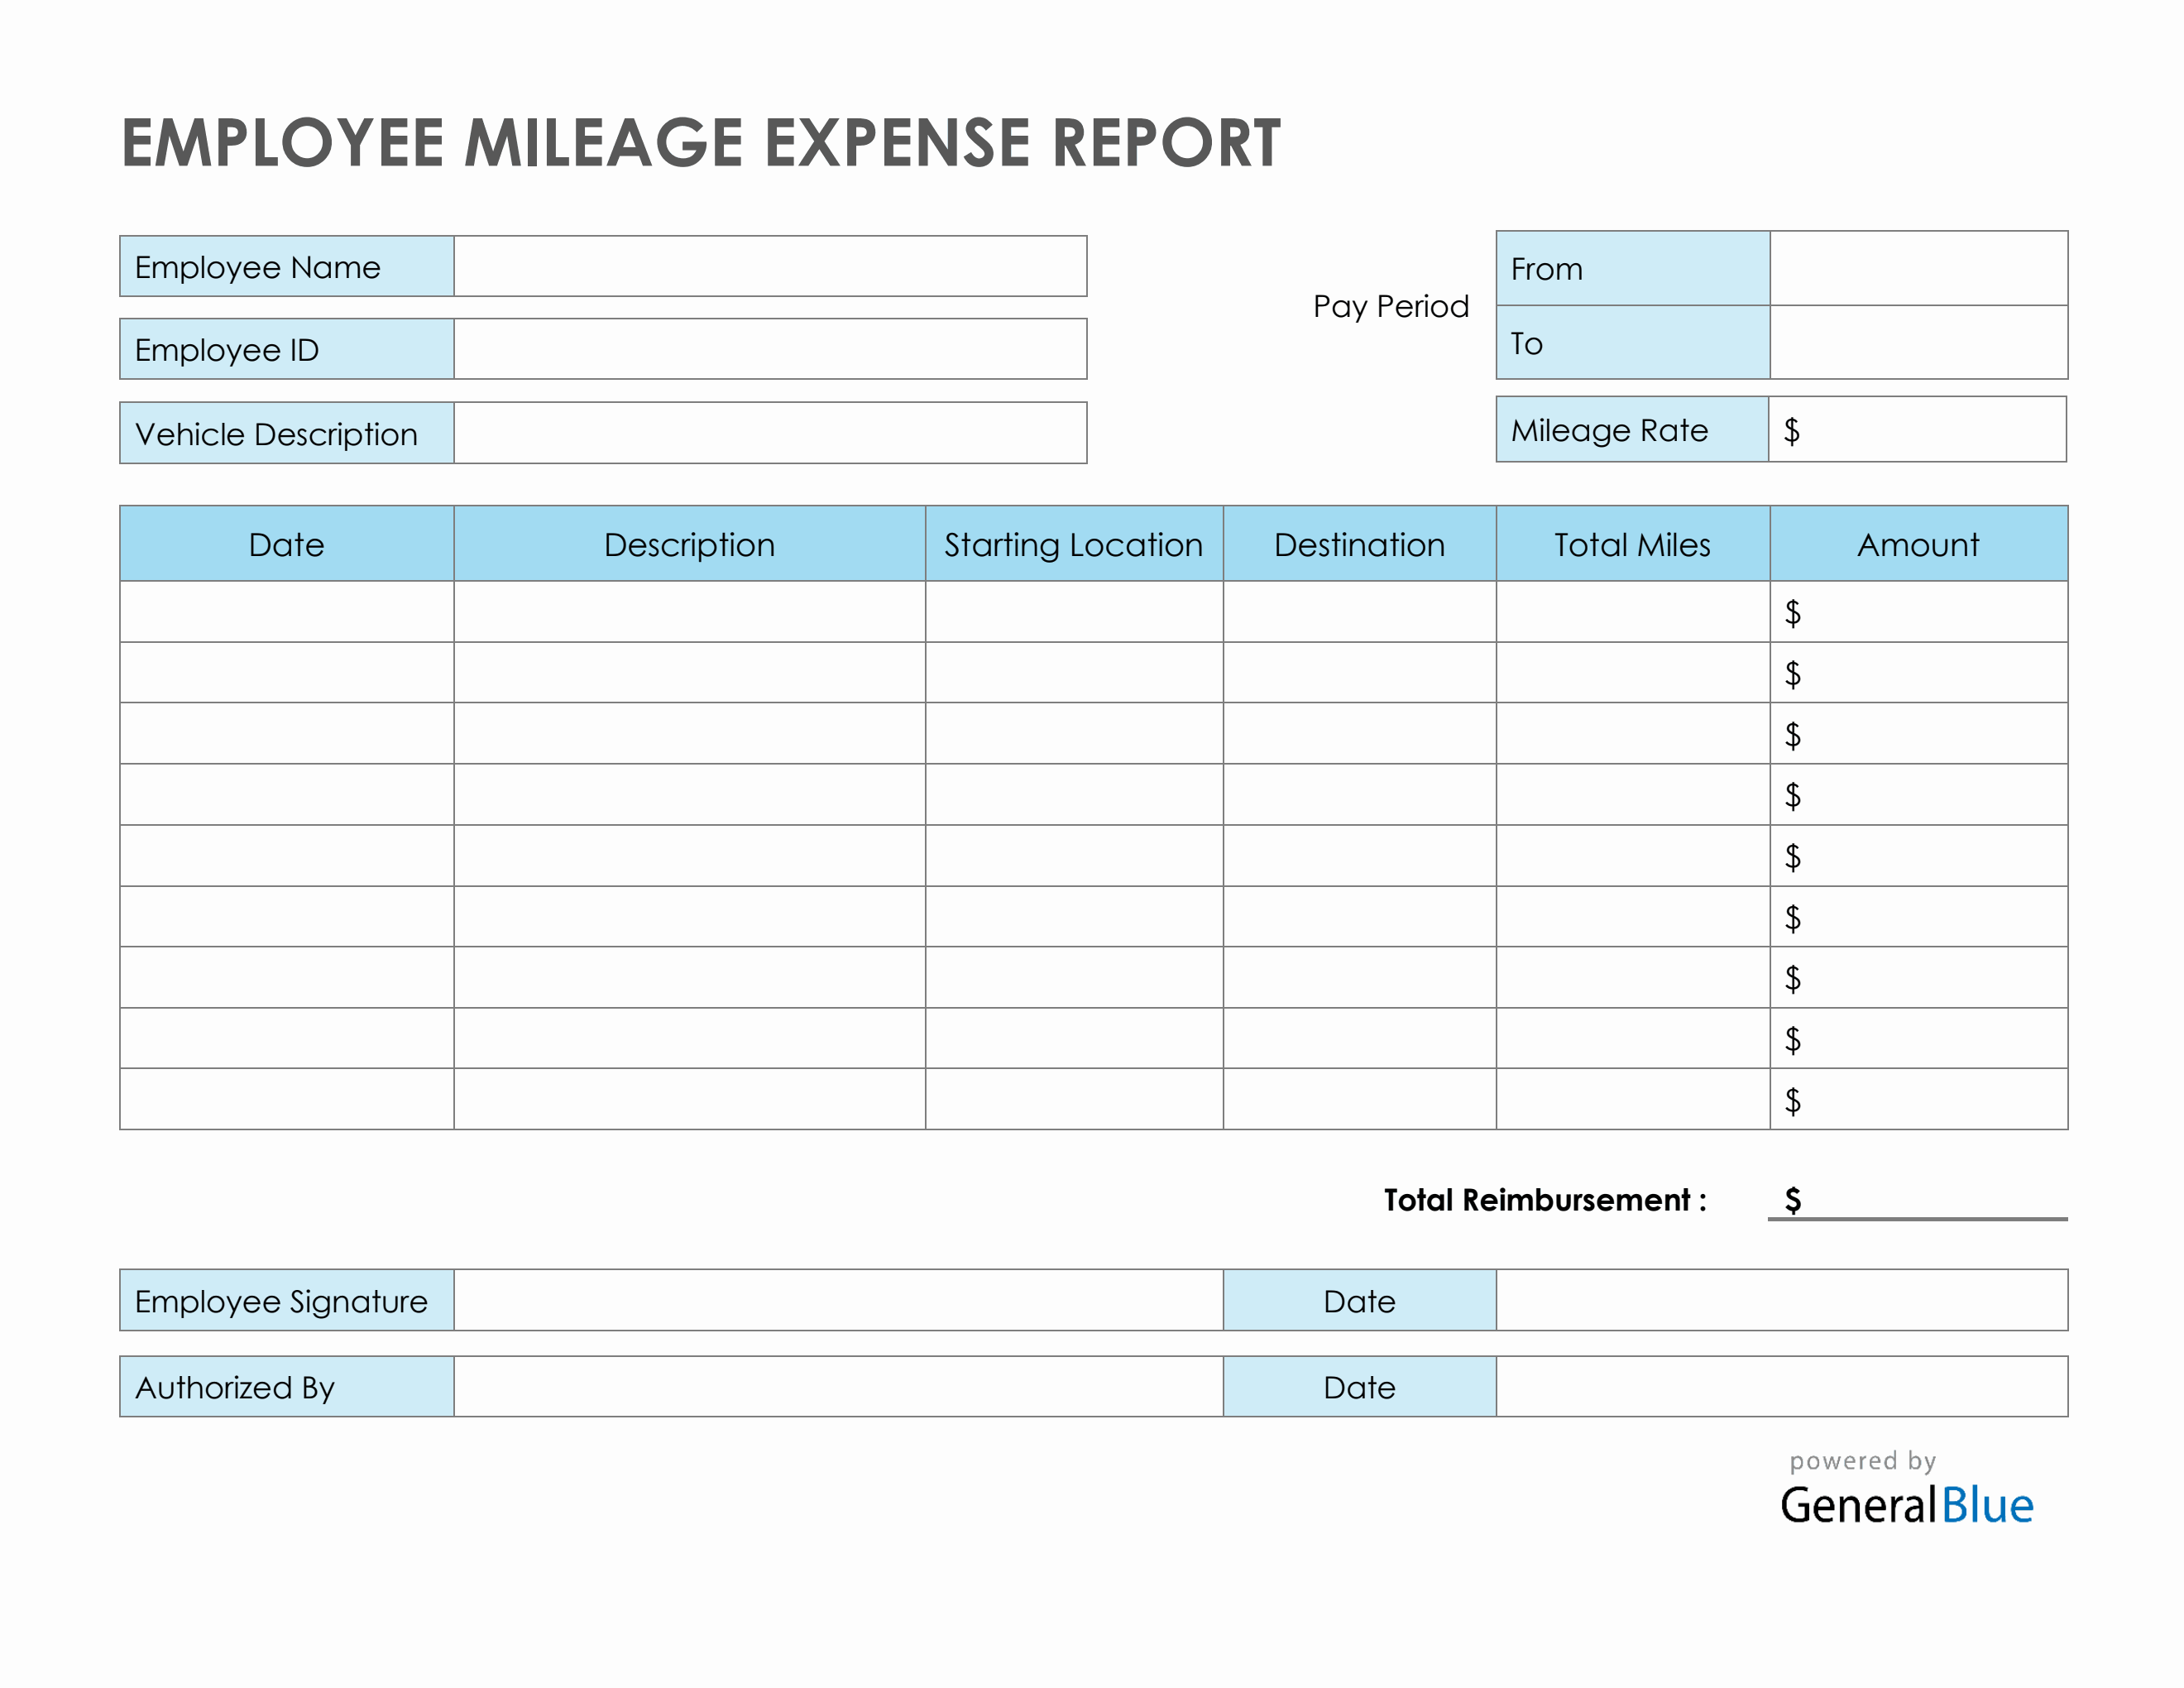 Employee Mileage Expense Report Template in Word With Gas Mileage Expense Report Template